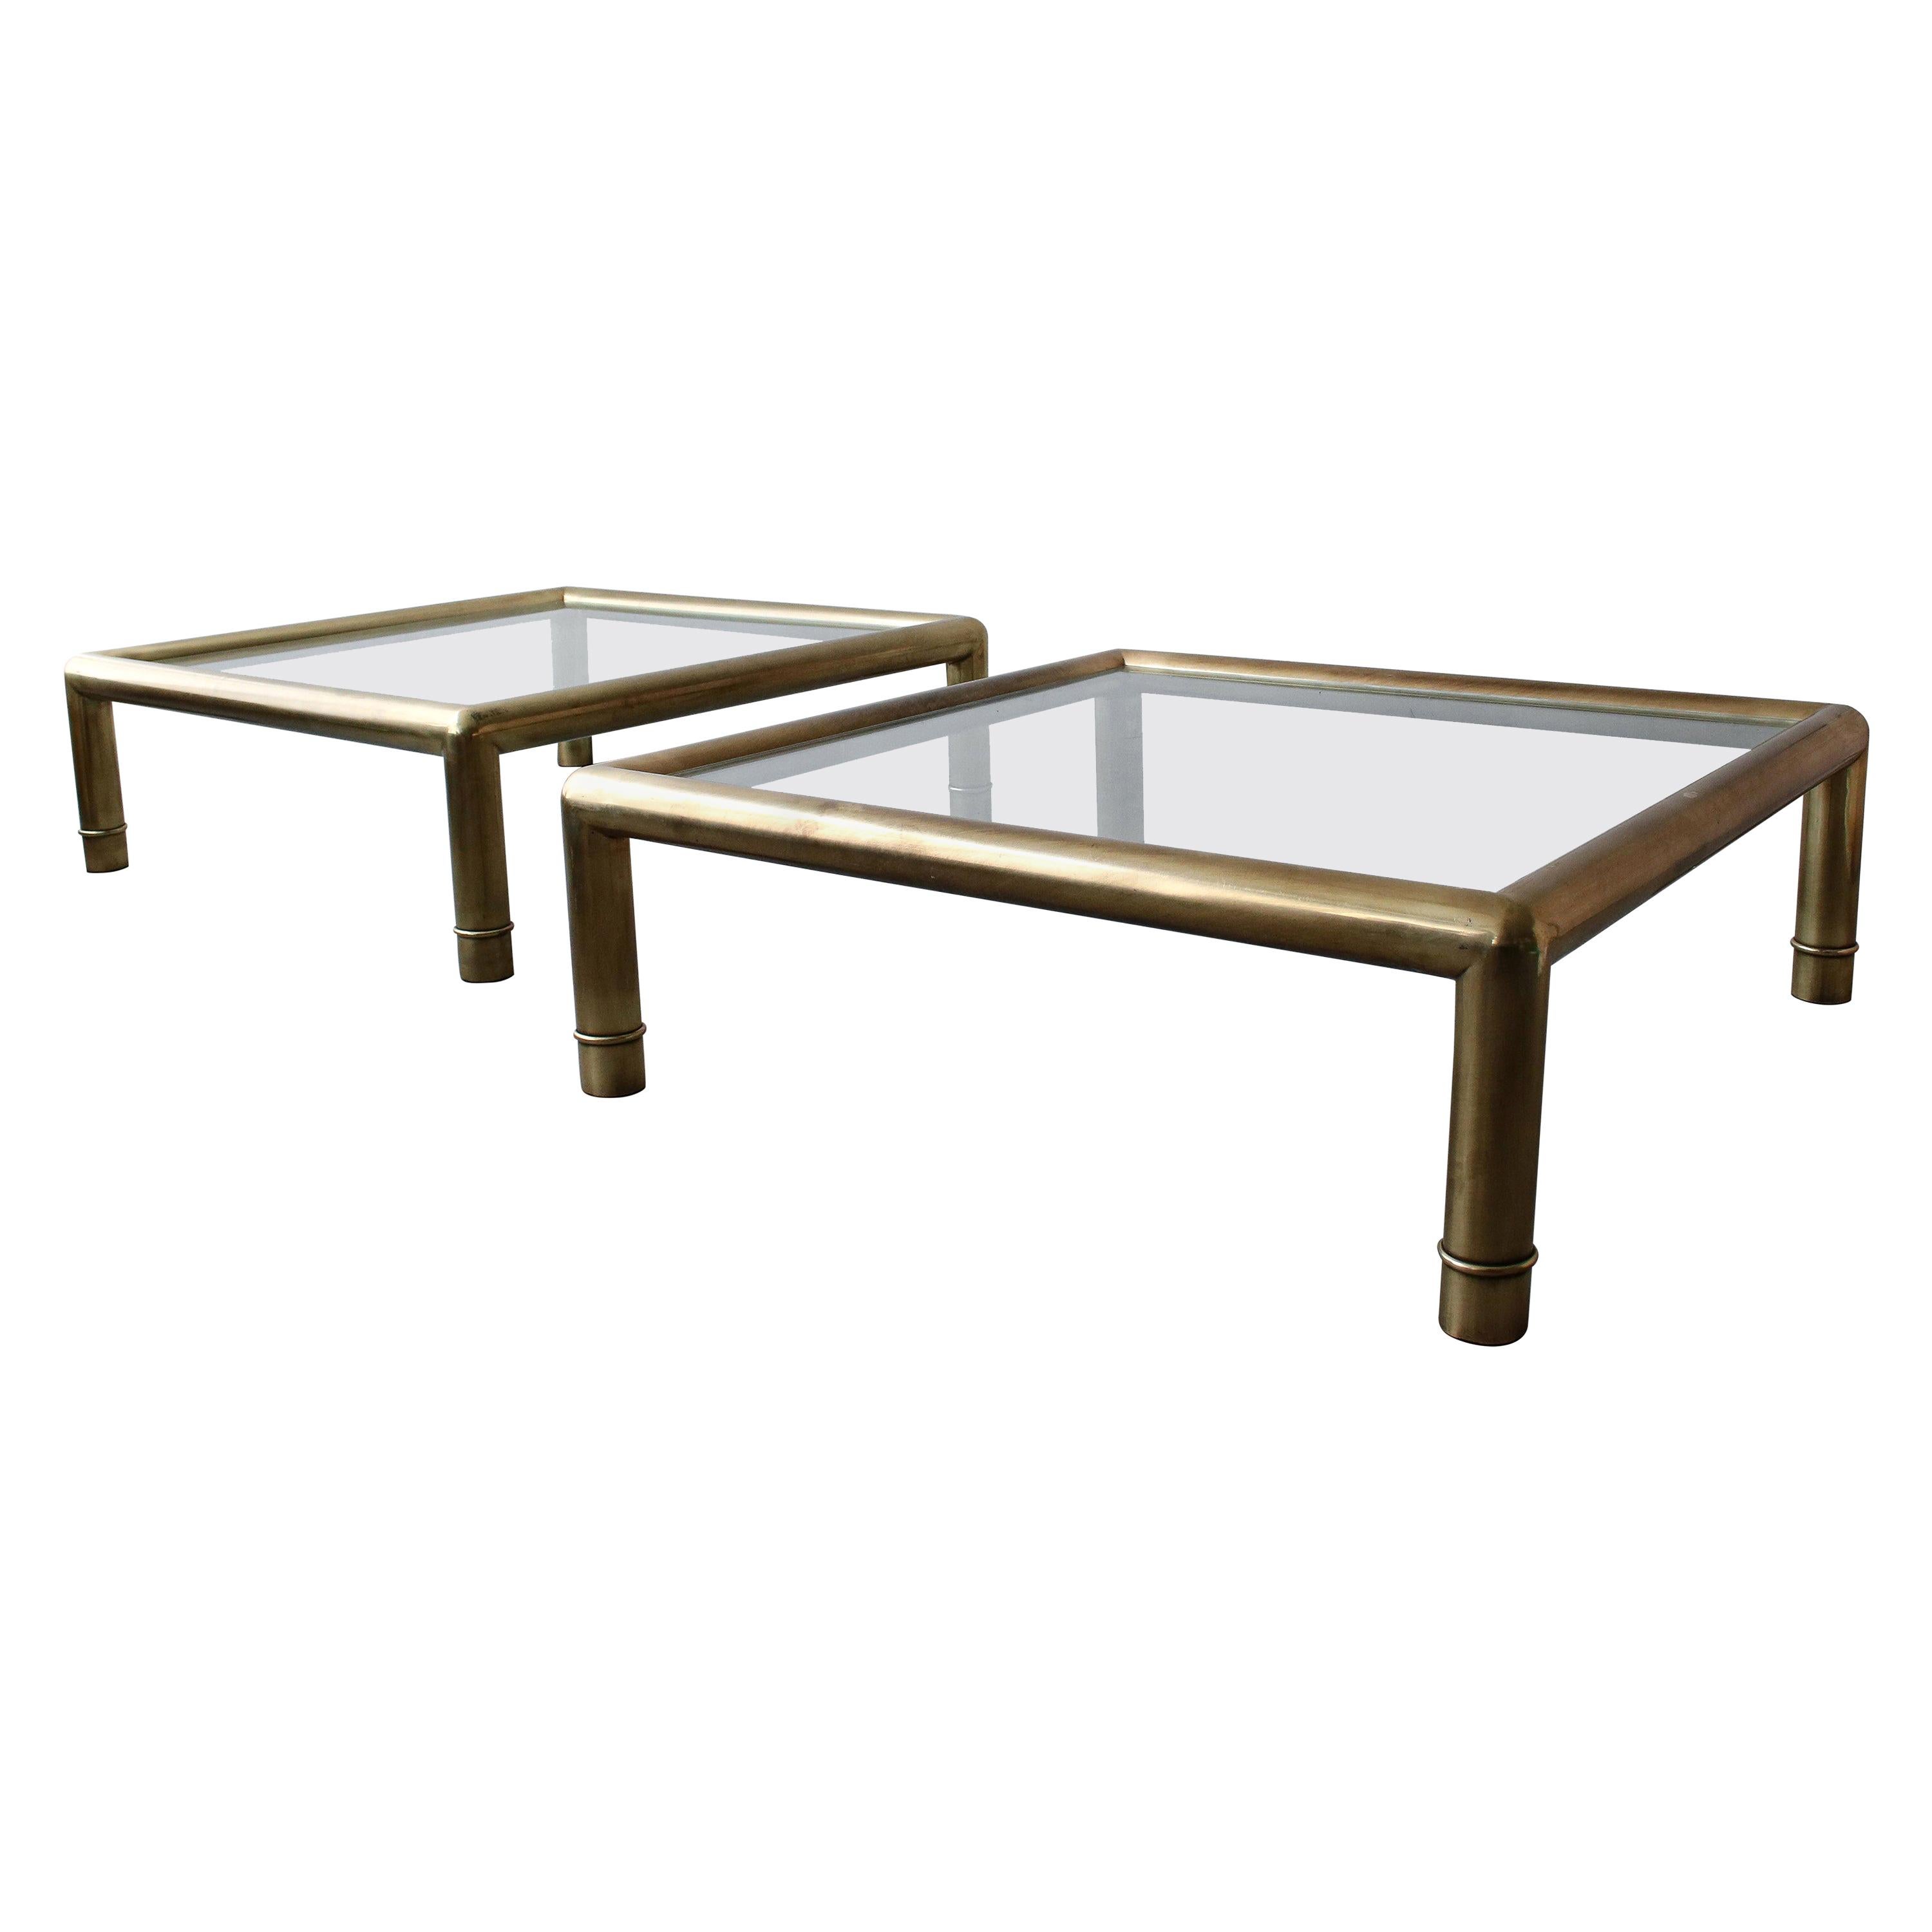 Pair of Tubular Brass Coffee Tables by Mastercraft